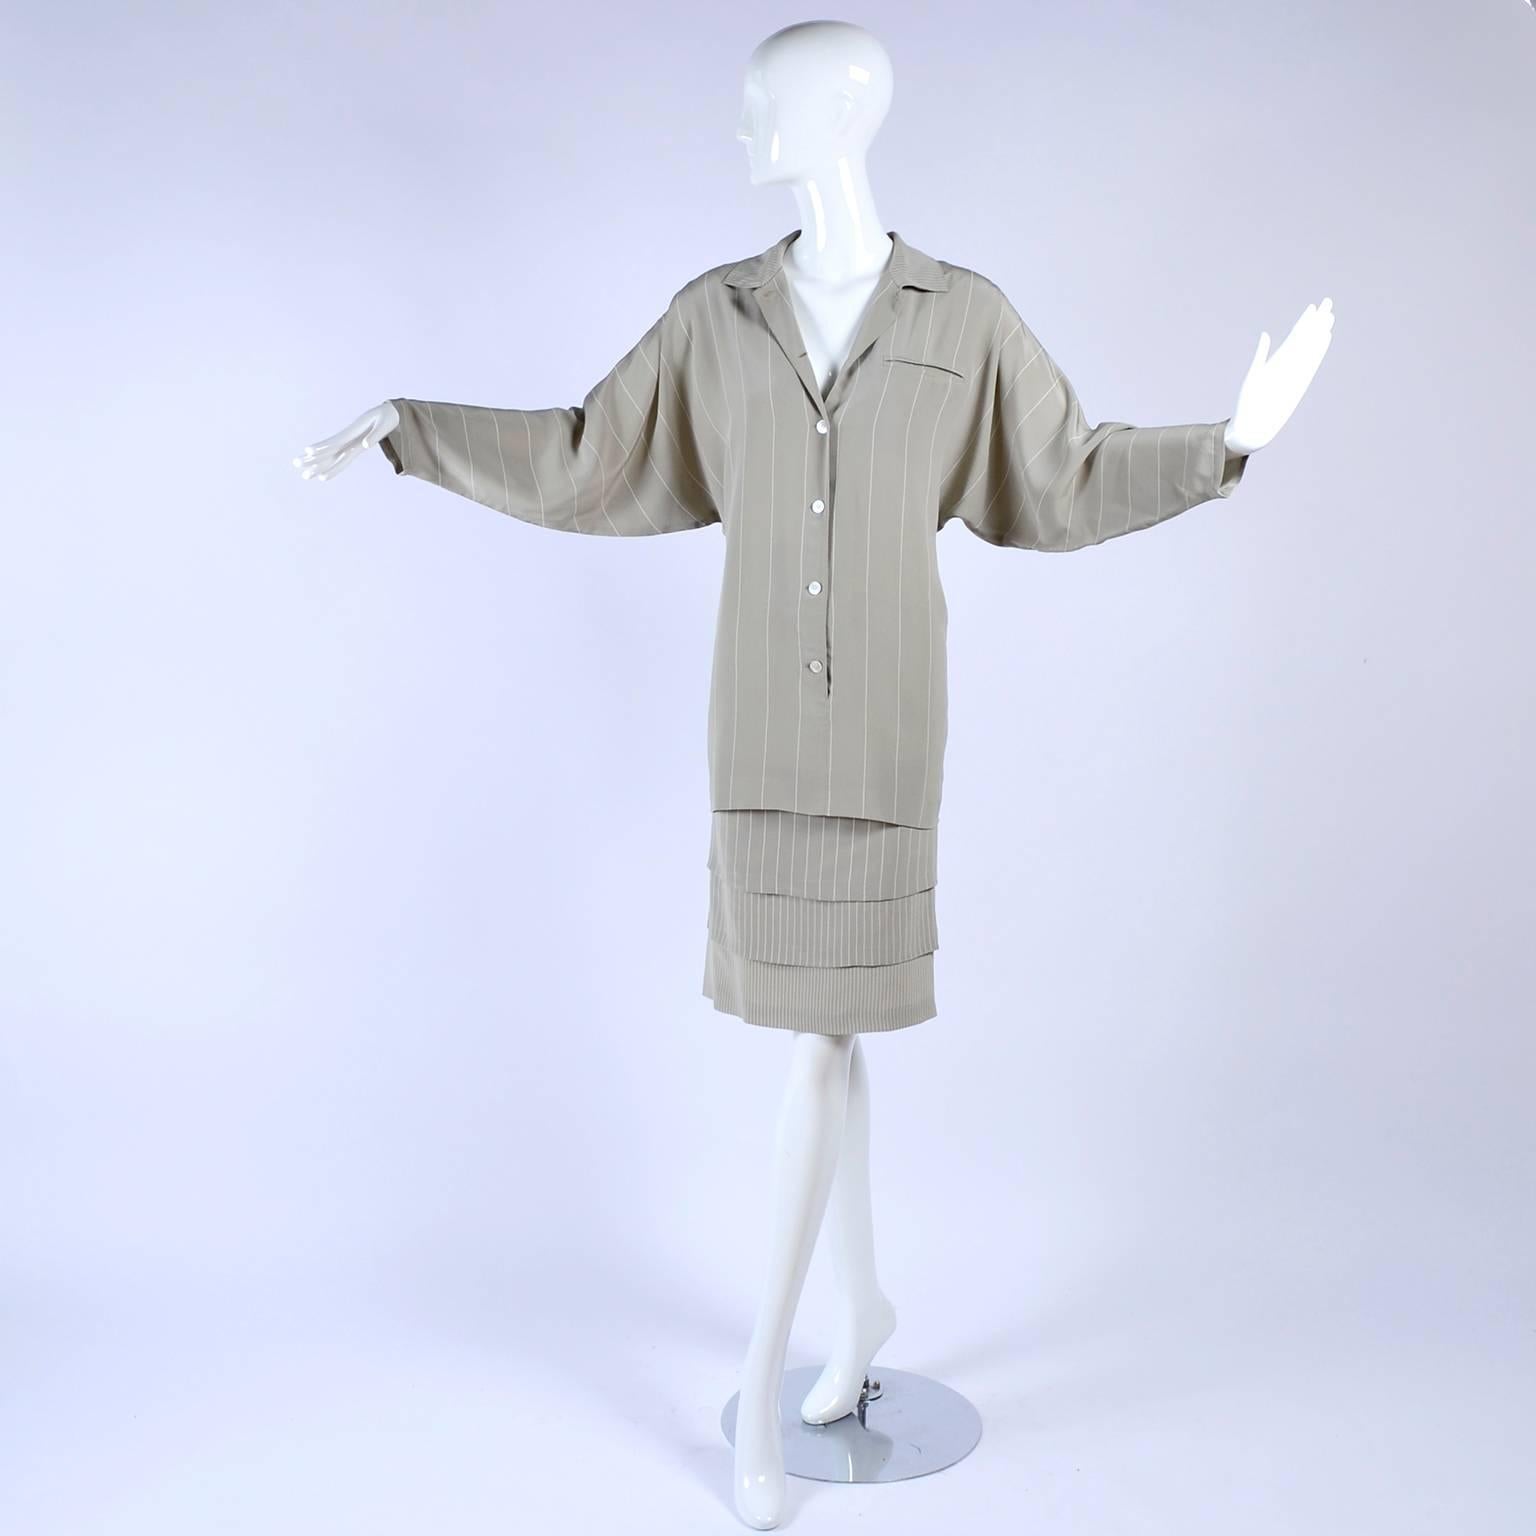 This vintage Louis Feraud dress can be worn effortlessly today and fit into modern styling!  The silk dress has thin white pinstripes, dolman sleeves, and a pretty tiered / layered hem.  The dress buttons up the front and was made in West Germany in